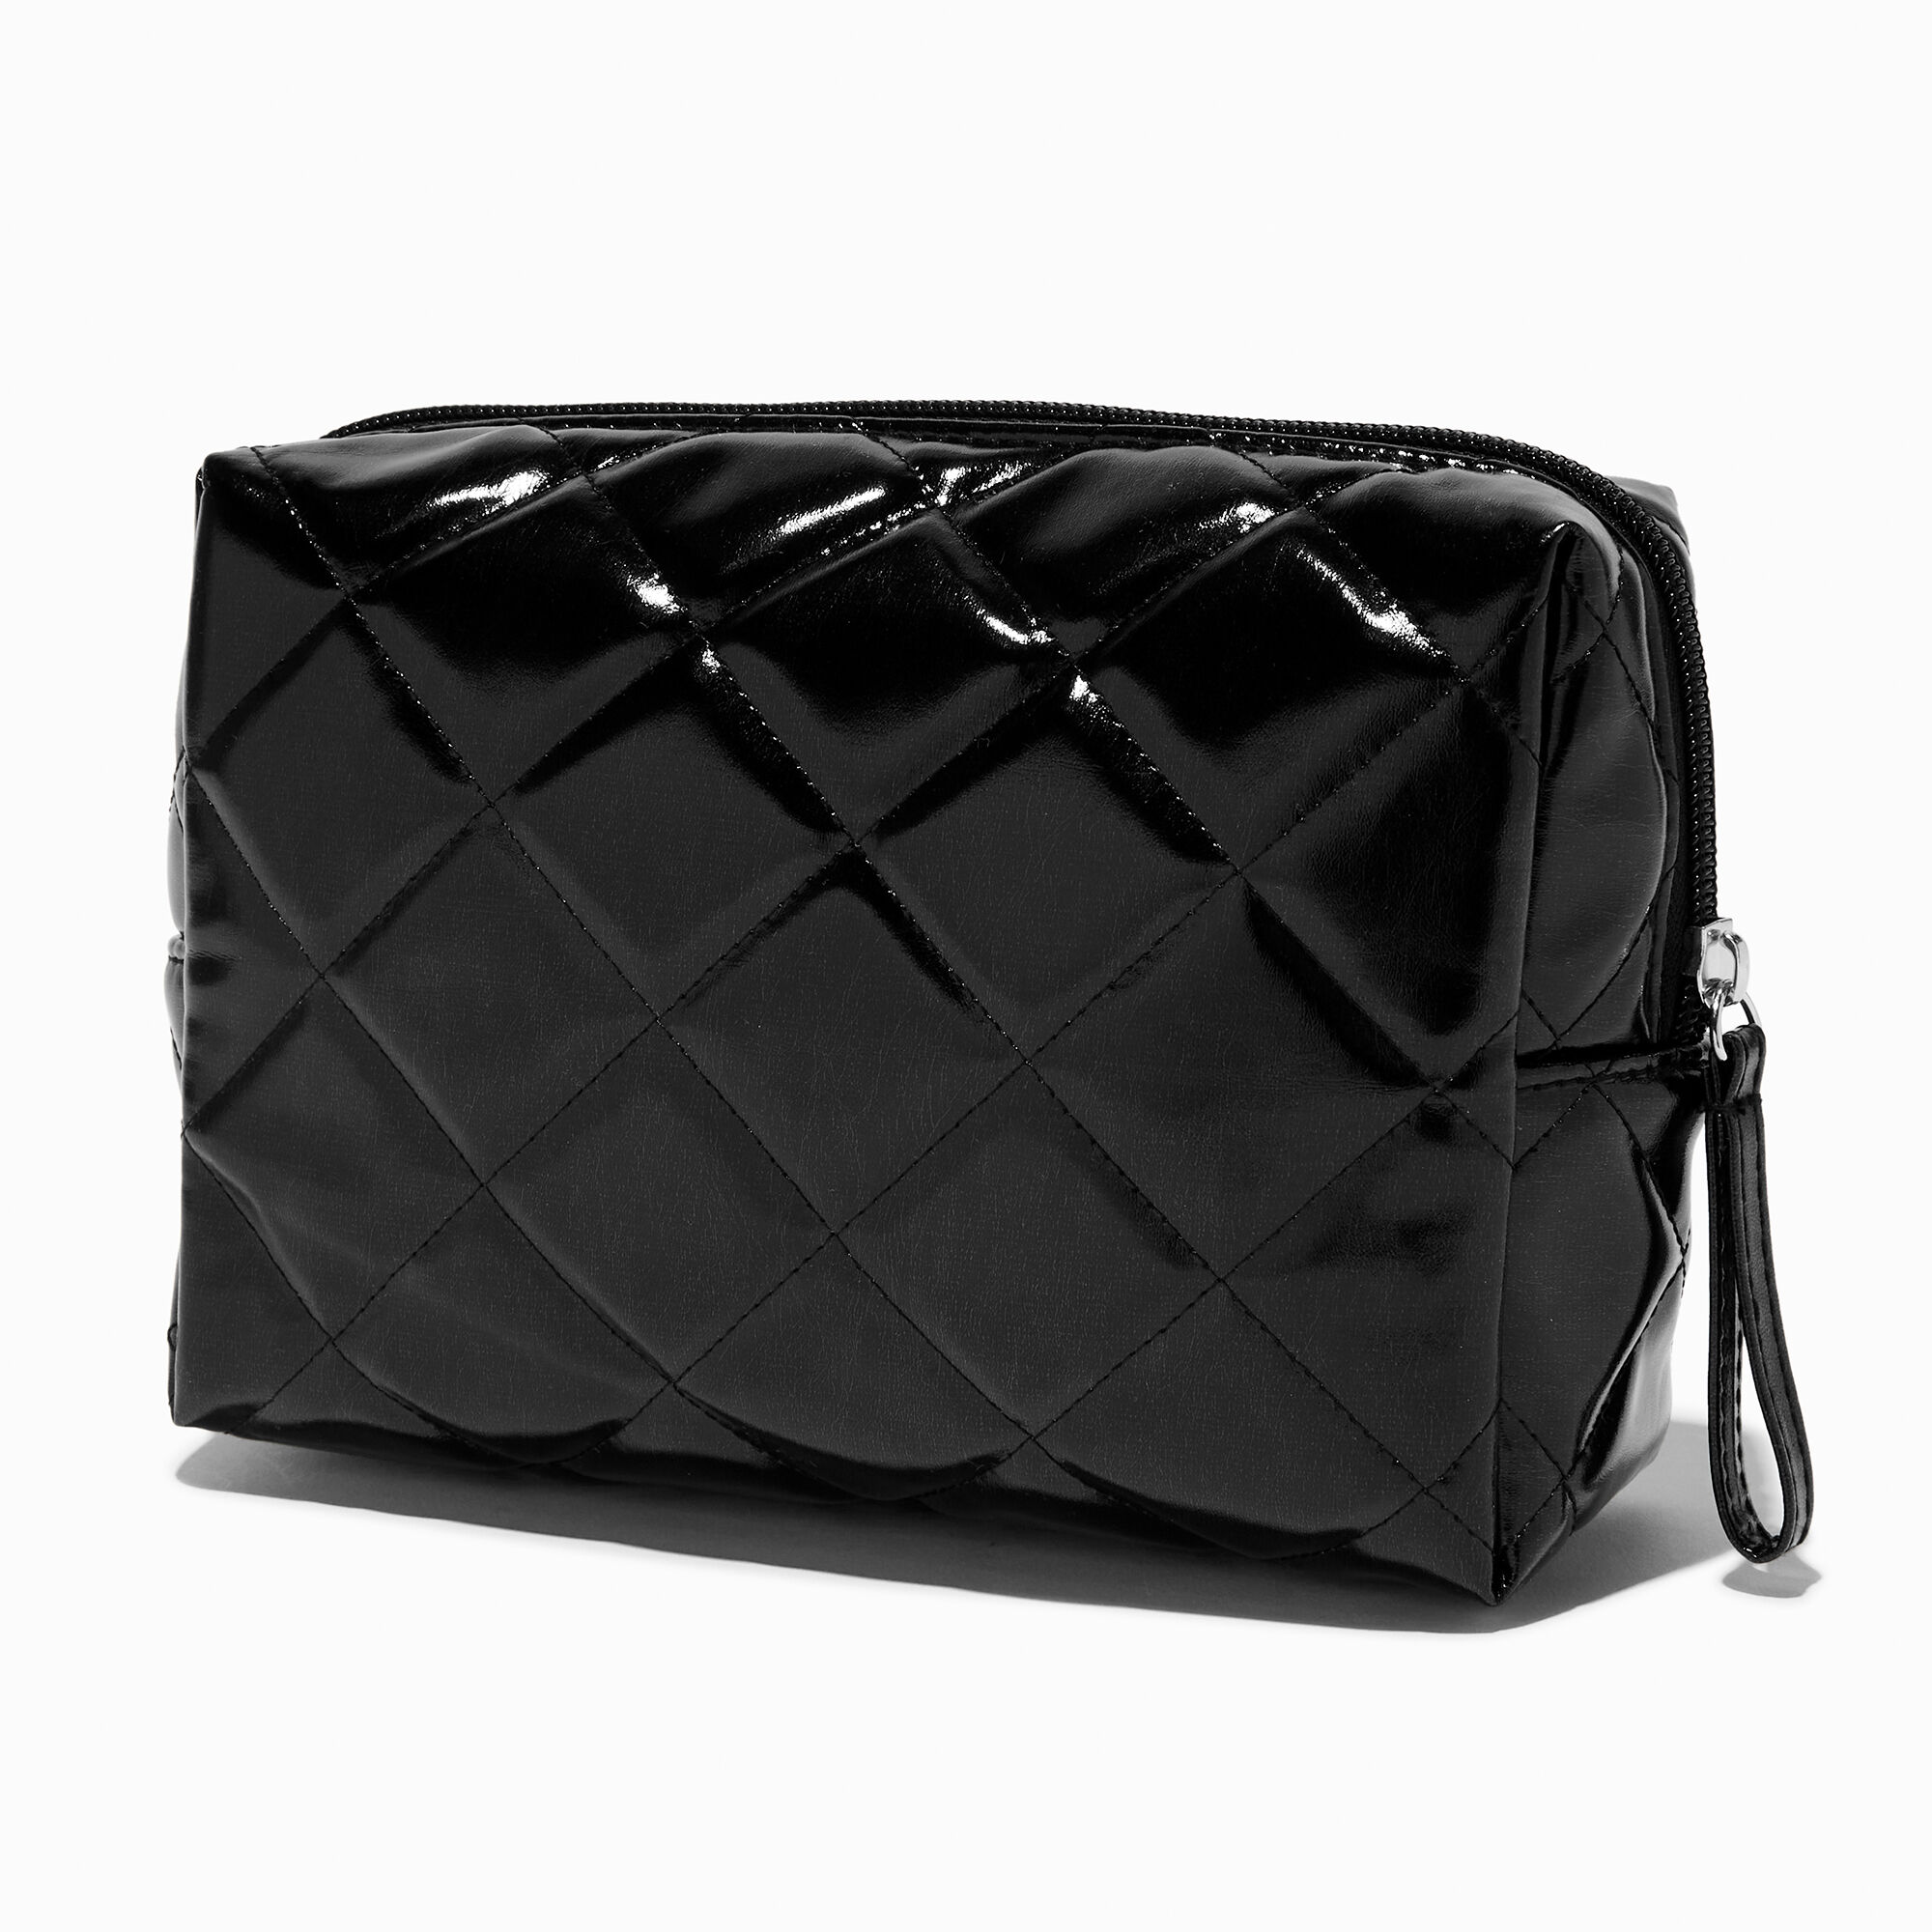 View Claires Quilted Medium Makeup Bag Black information